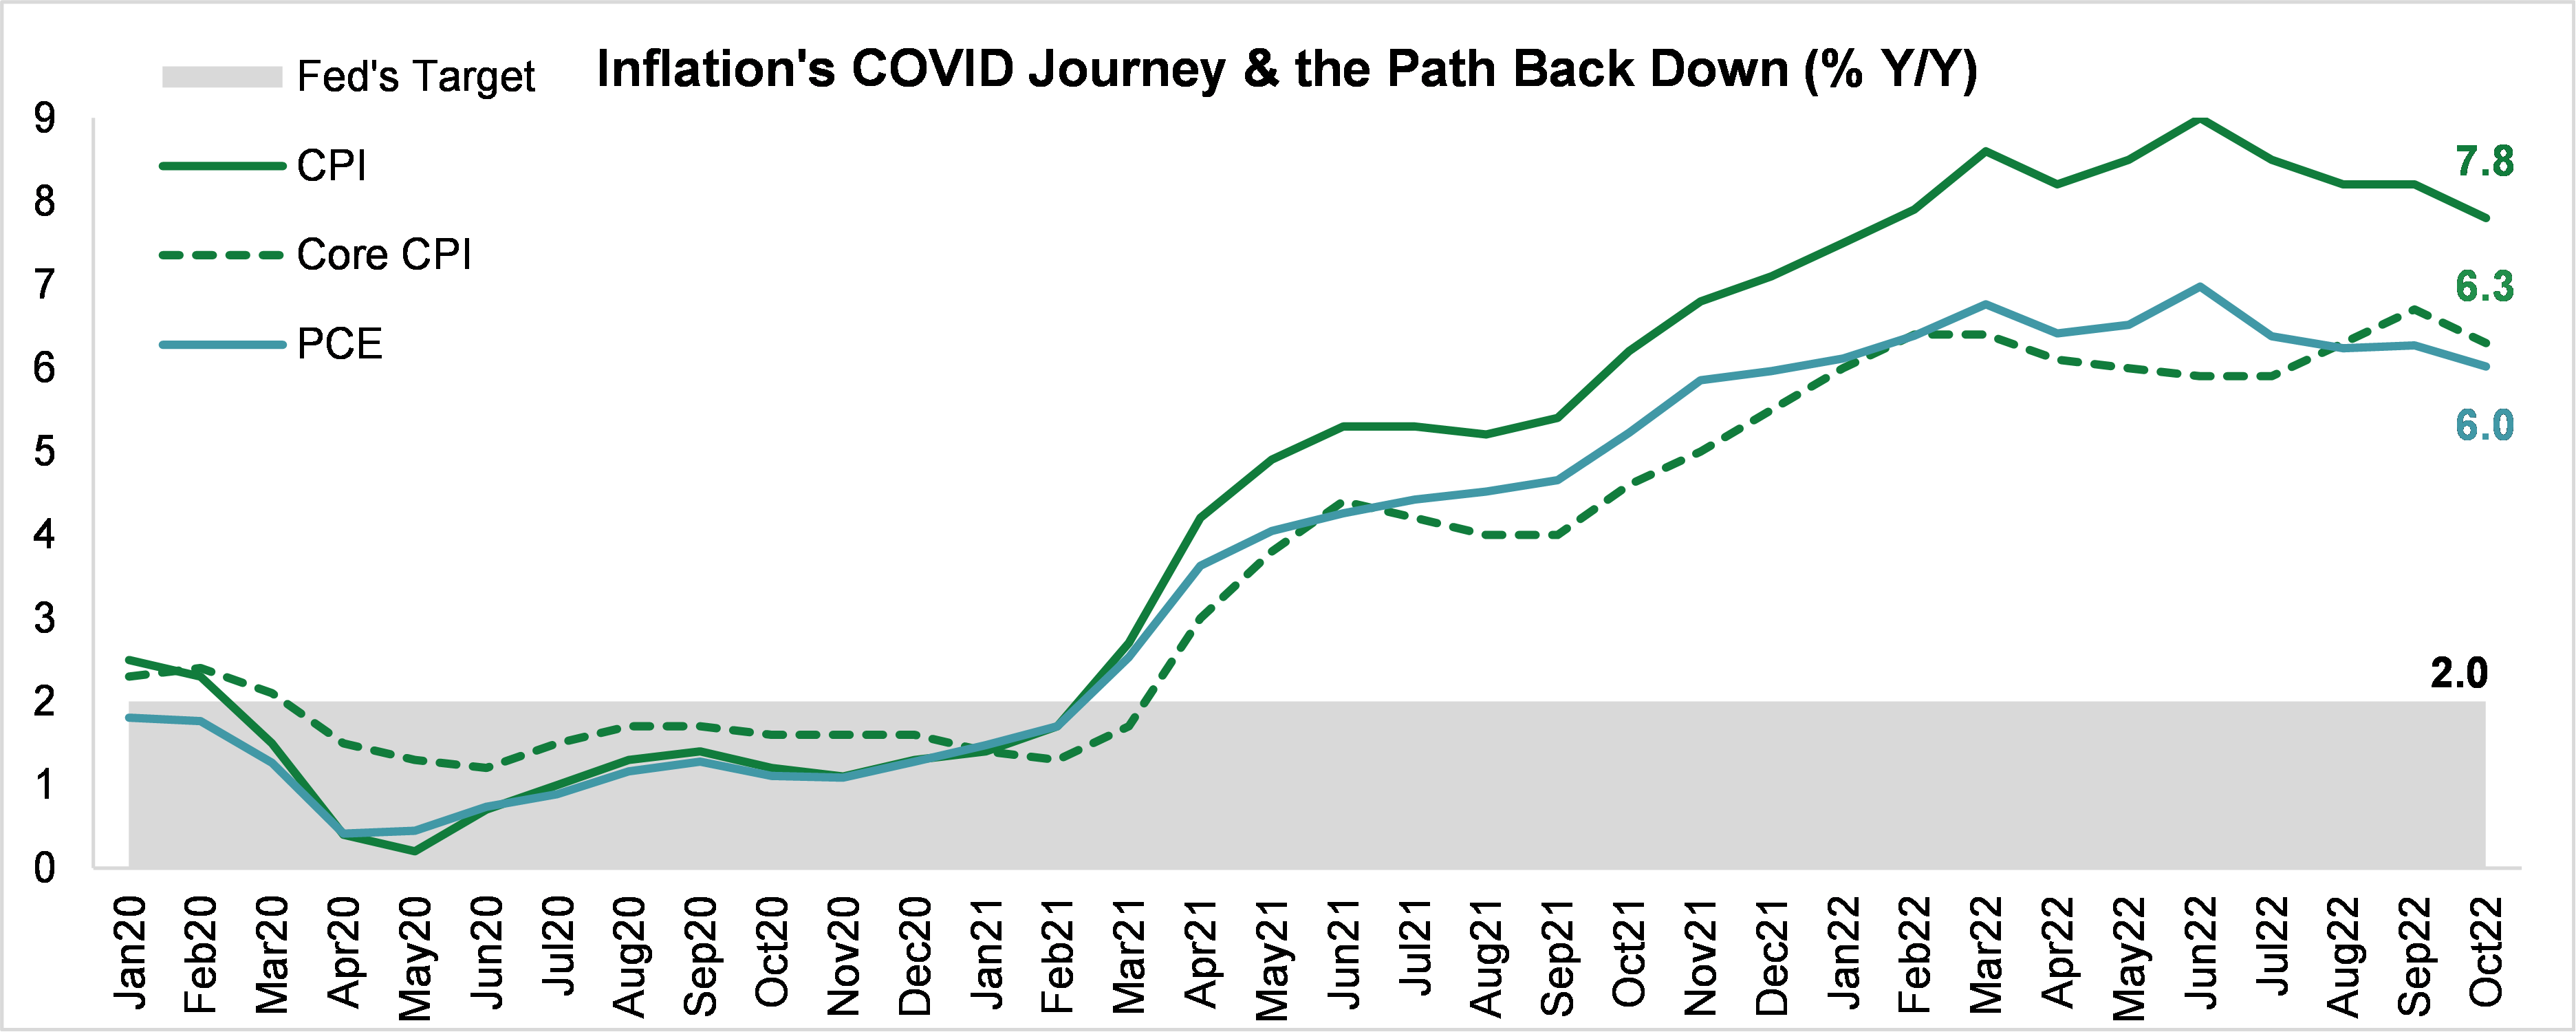 Inflation's COVID Journey and the Path Back Down